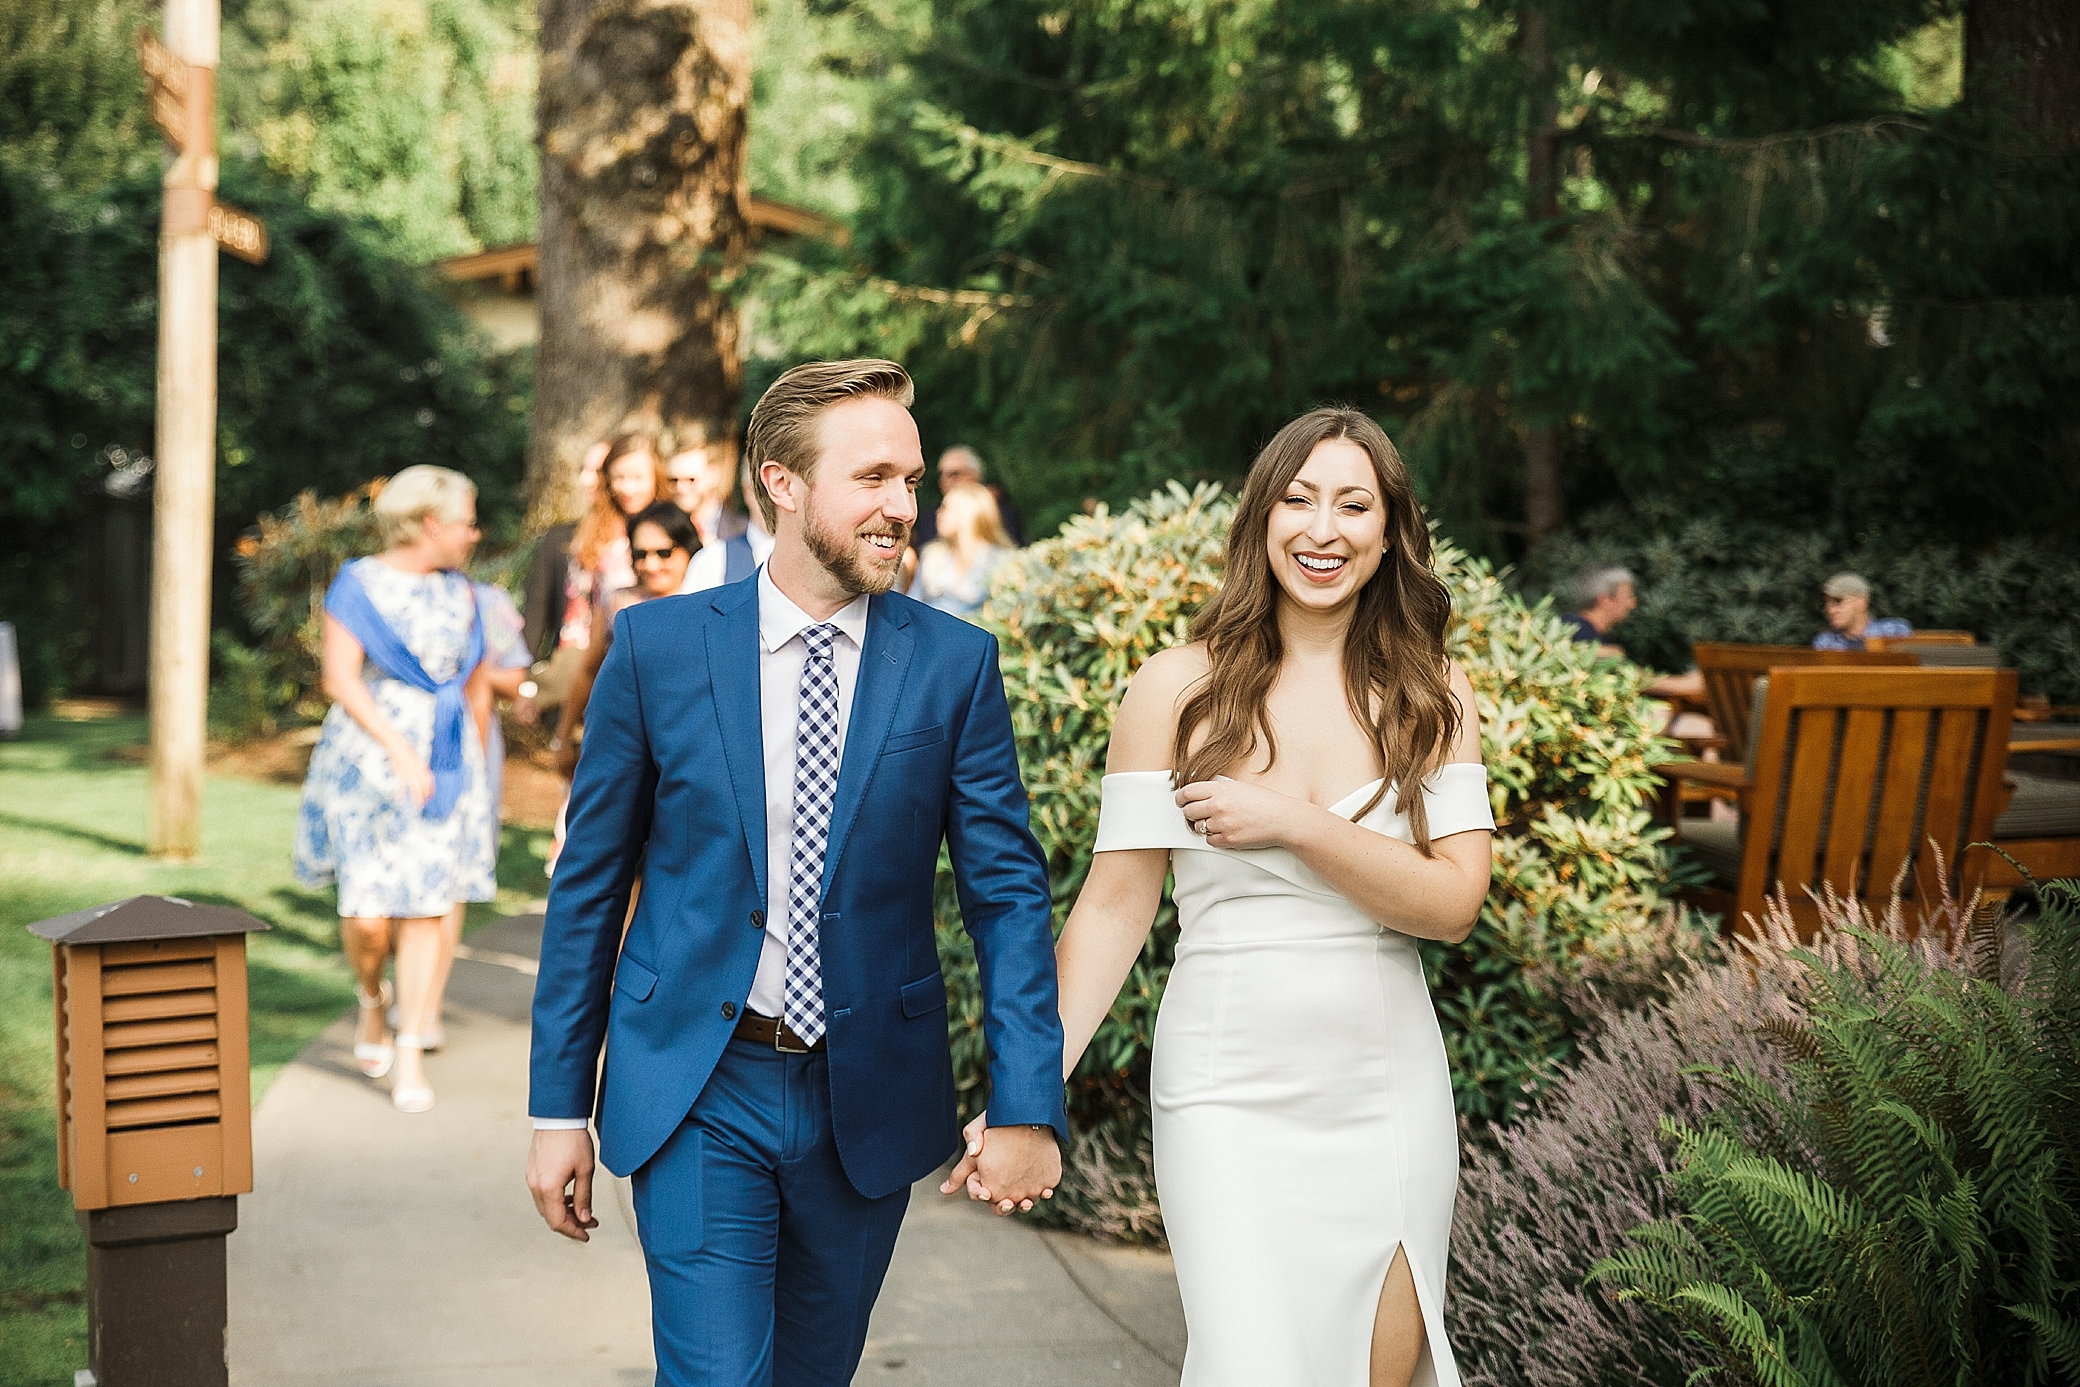 Wedding rehearsal dinner at Alderbrook Resort and Spa. Photographed by Seattle Wedding Photographer, Megan Montalvo Photography. 